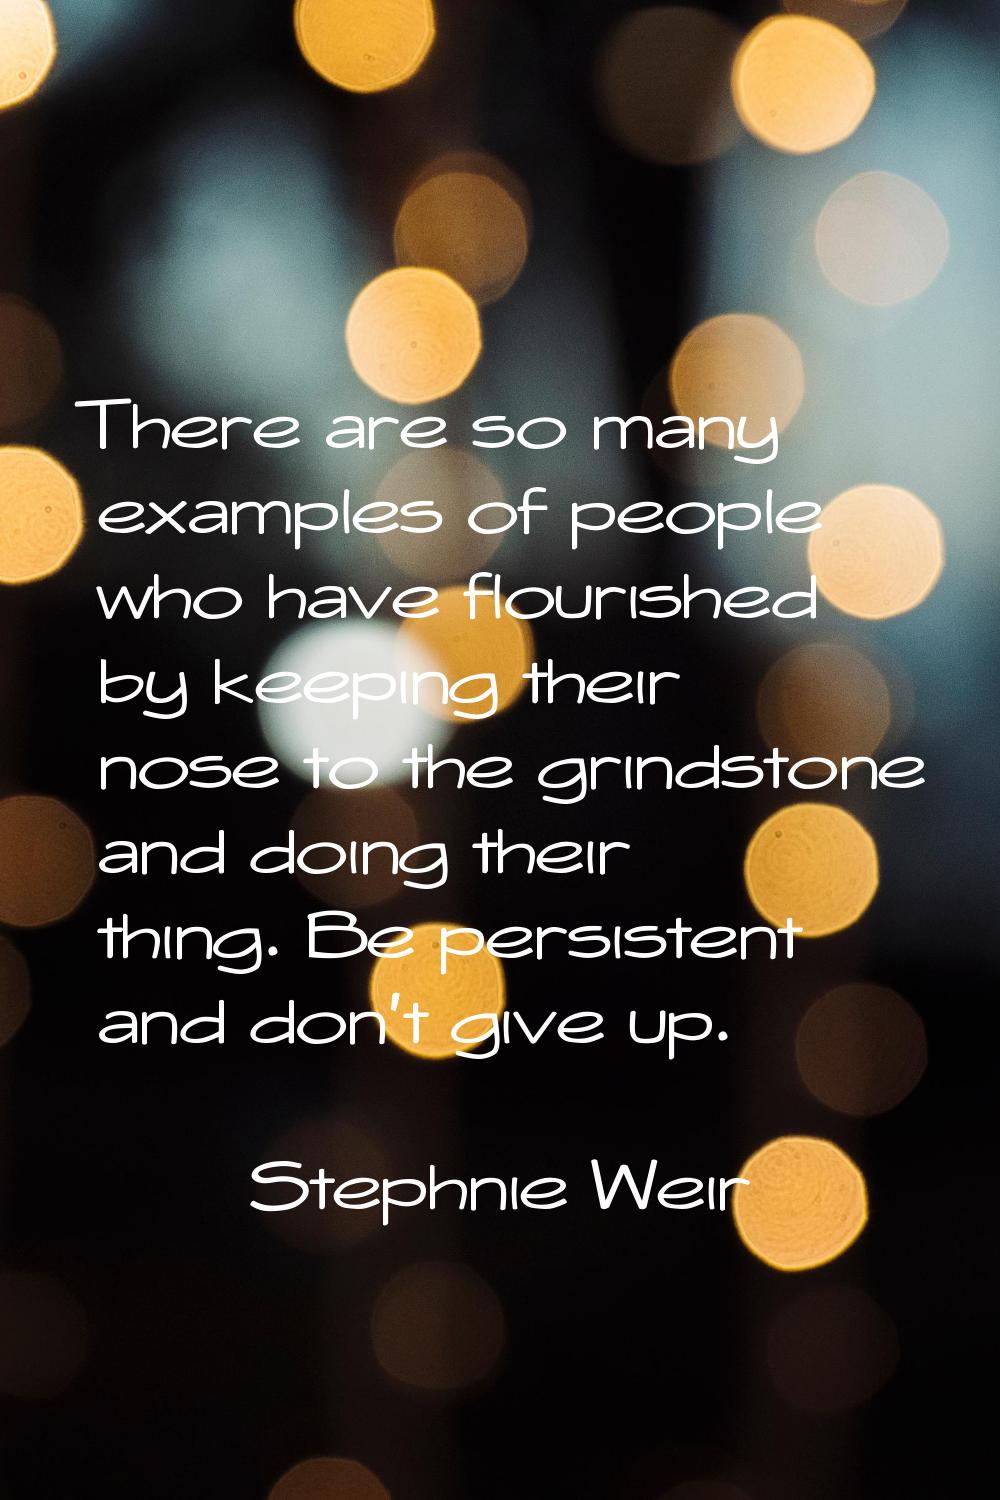 There are so many examples of people who have flourished by keeping their nose to the grindstone an